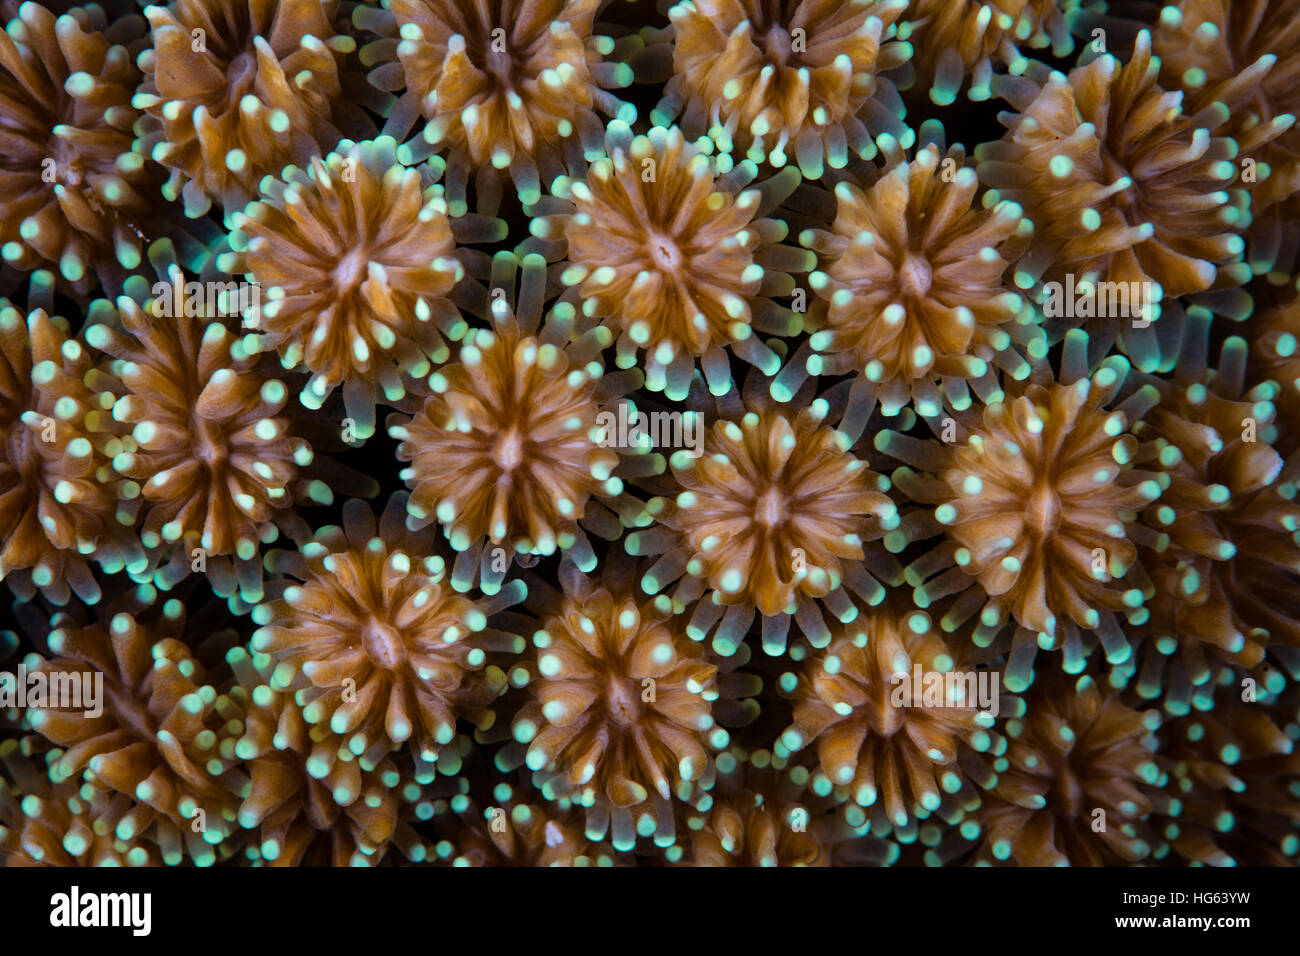 Detail of a stony coral growing in Wakatobi National Park, Indonesia. Stock Photo